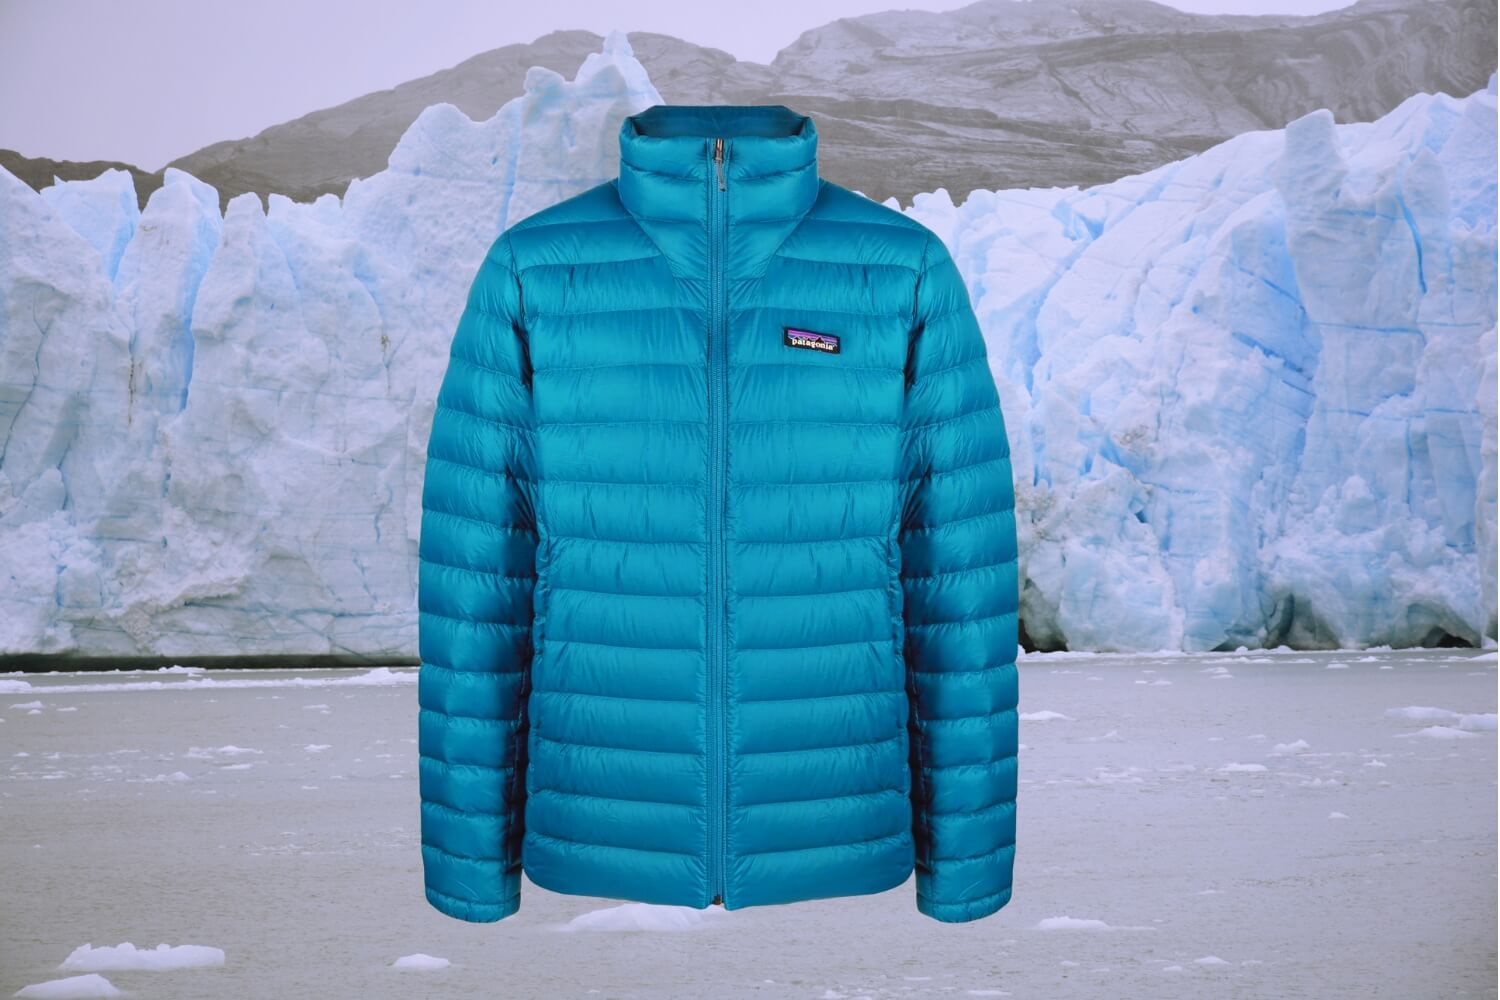 OVERALL BEST DOWN JACKET: PATAGONIA DOWN SWEATER HOODIE